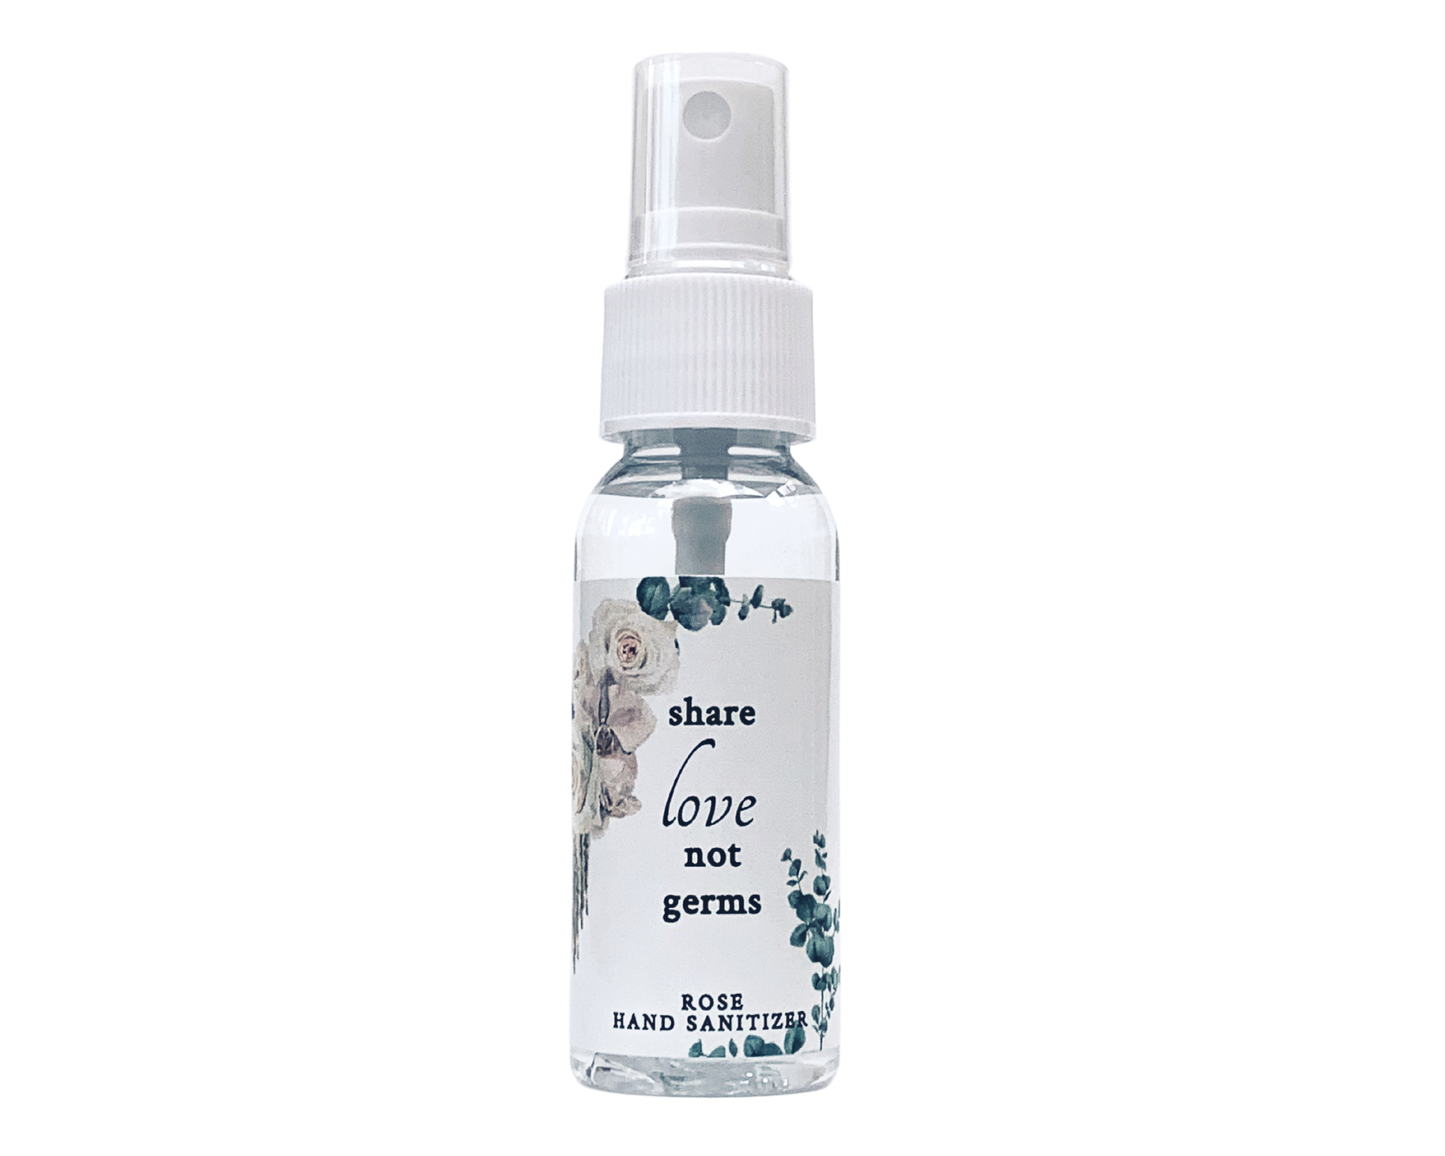 Hand Sanitizer Party Favor - White Roses - Share Love Not Germs- with Aloe & Essential Oils by Sunshine & Sanitizer